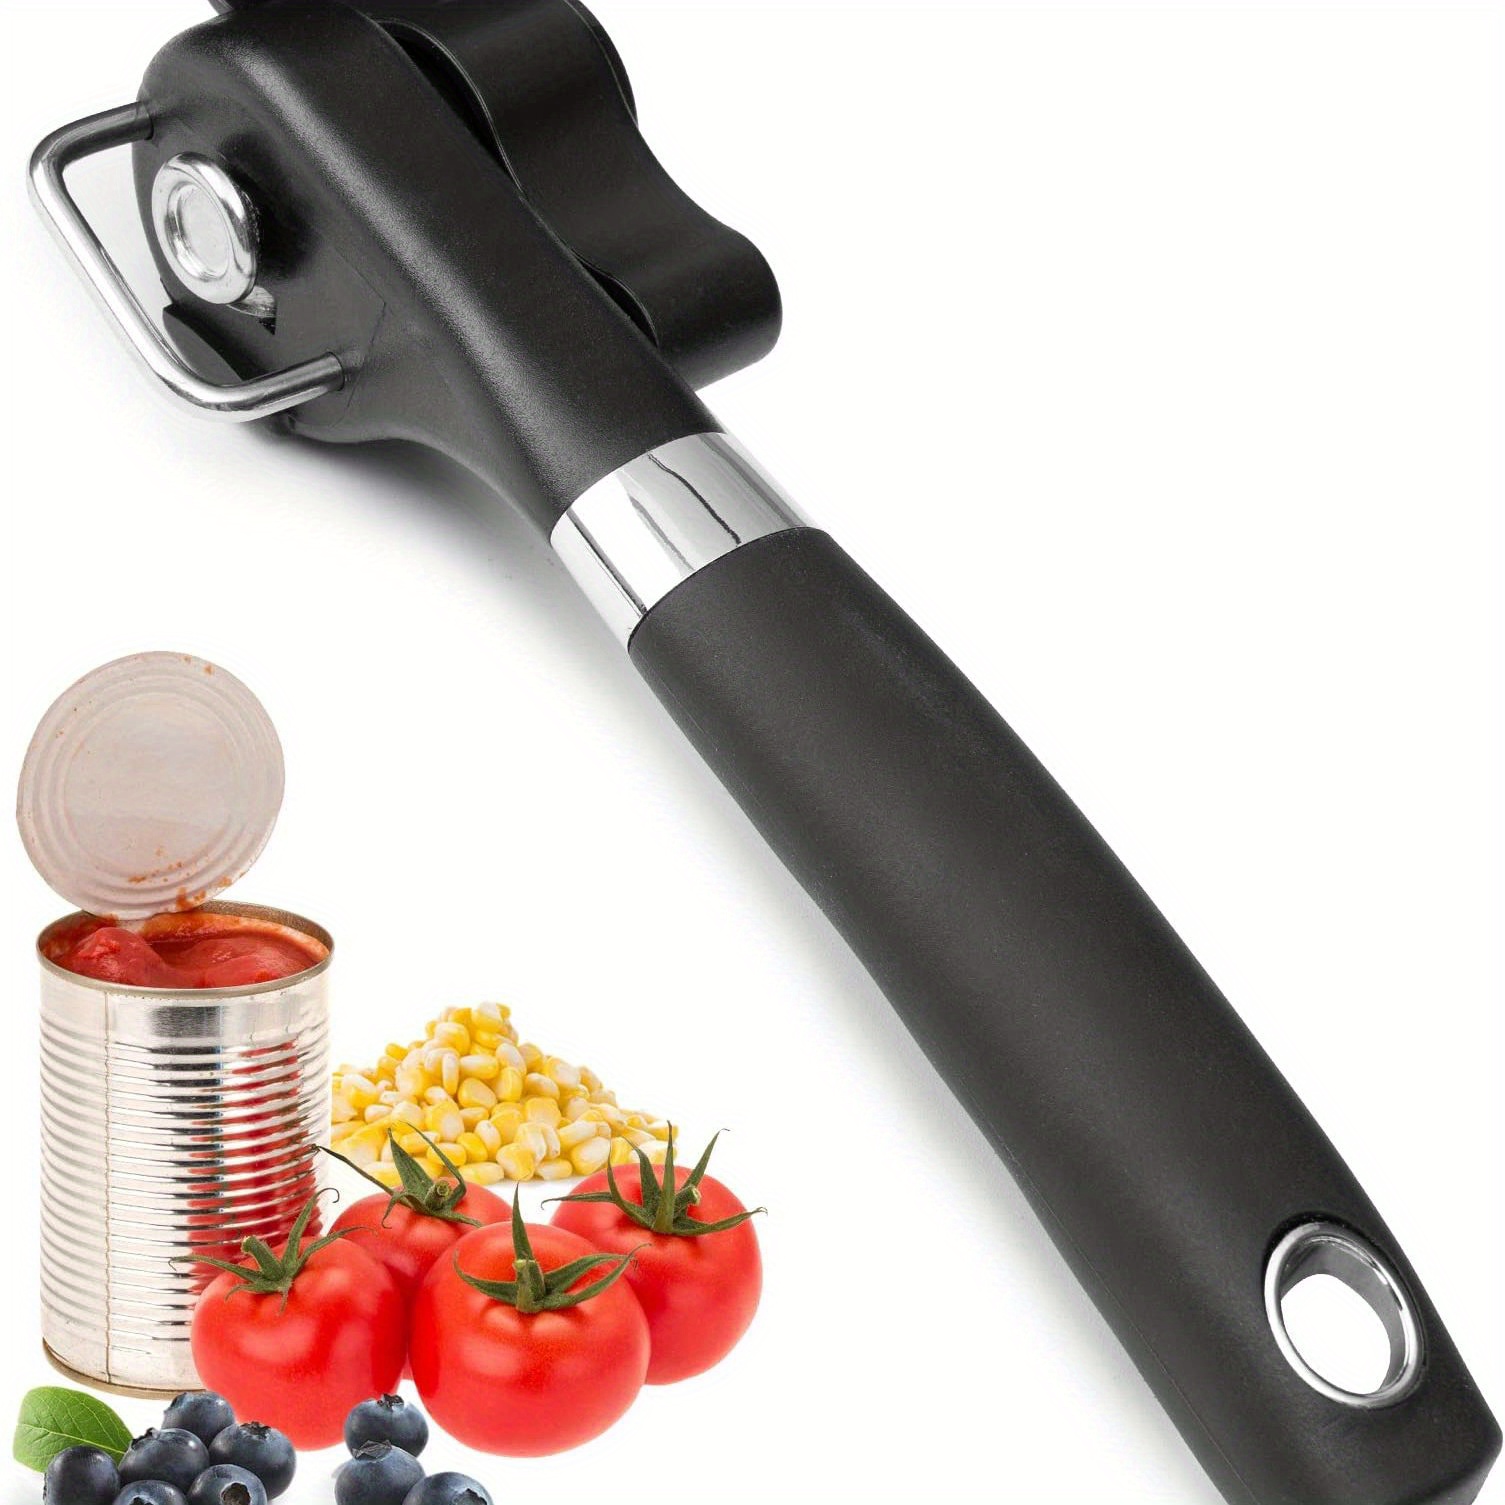 Can Opener Smooth Edge Manual, Can Opener Handheld, No Sharp Edges With  Soft Grips, Food Grade Stainless Steel Cutting Can Opener, Professional